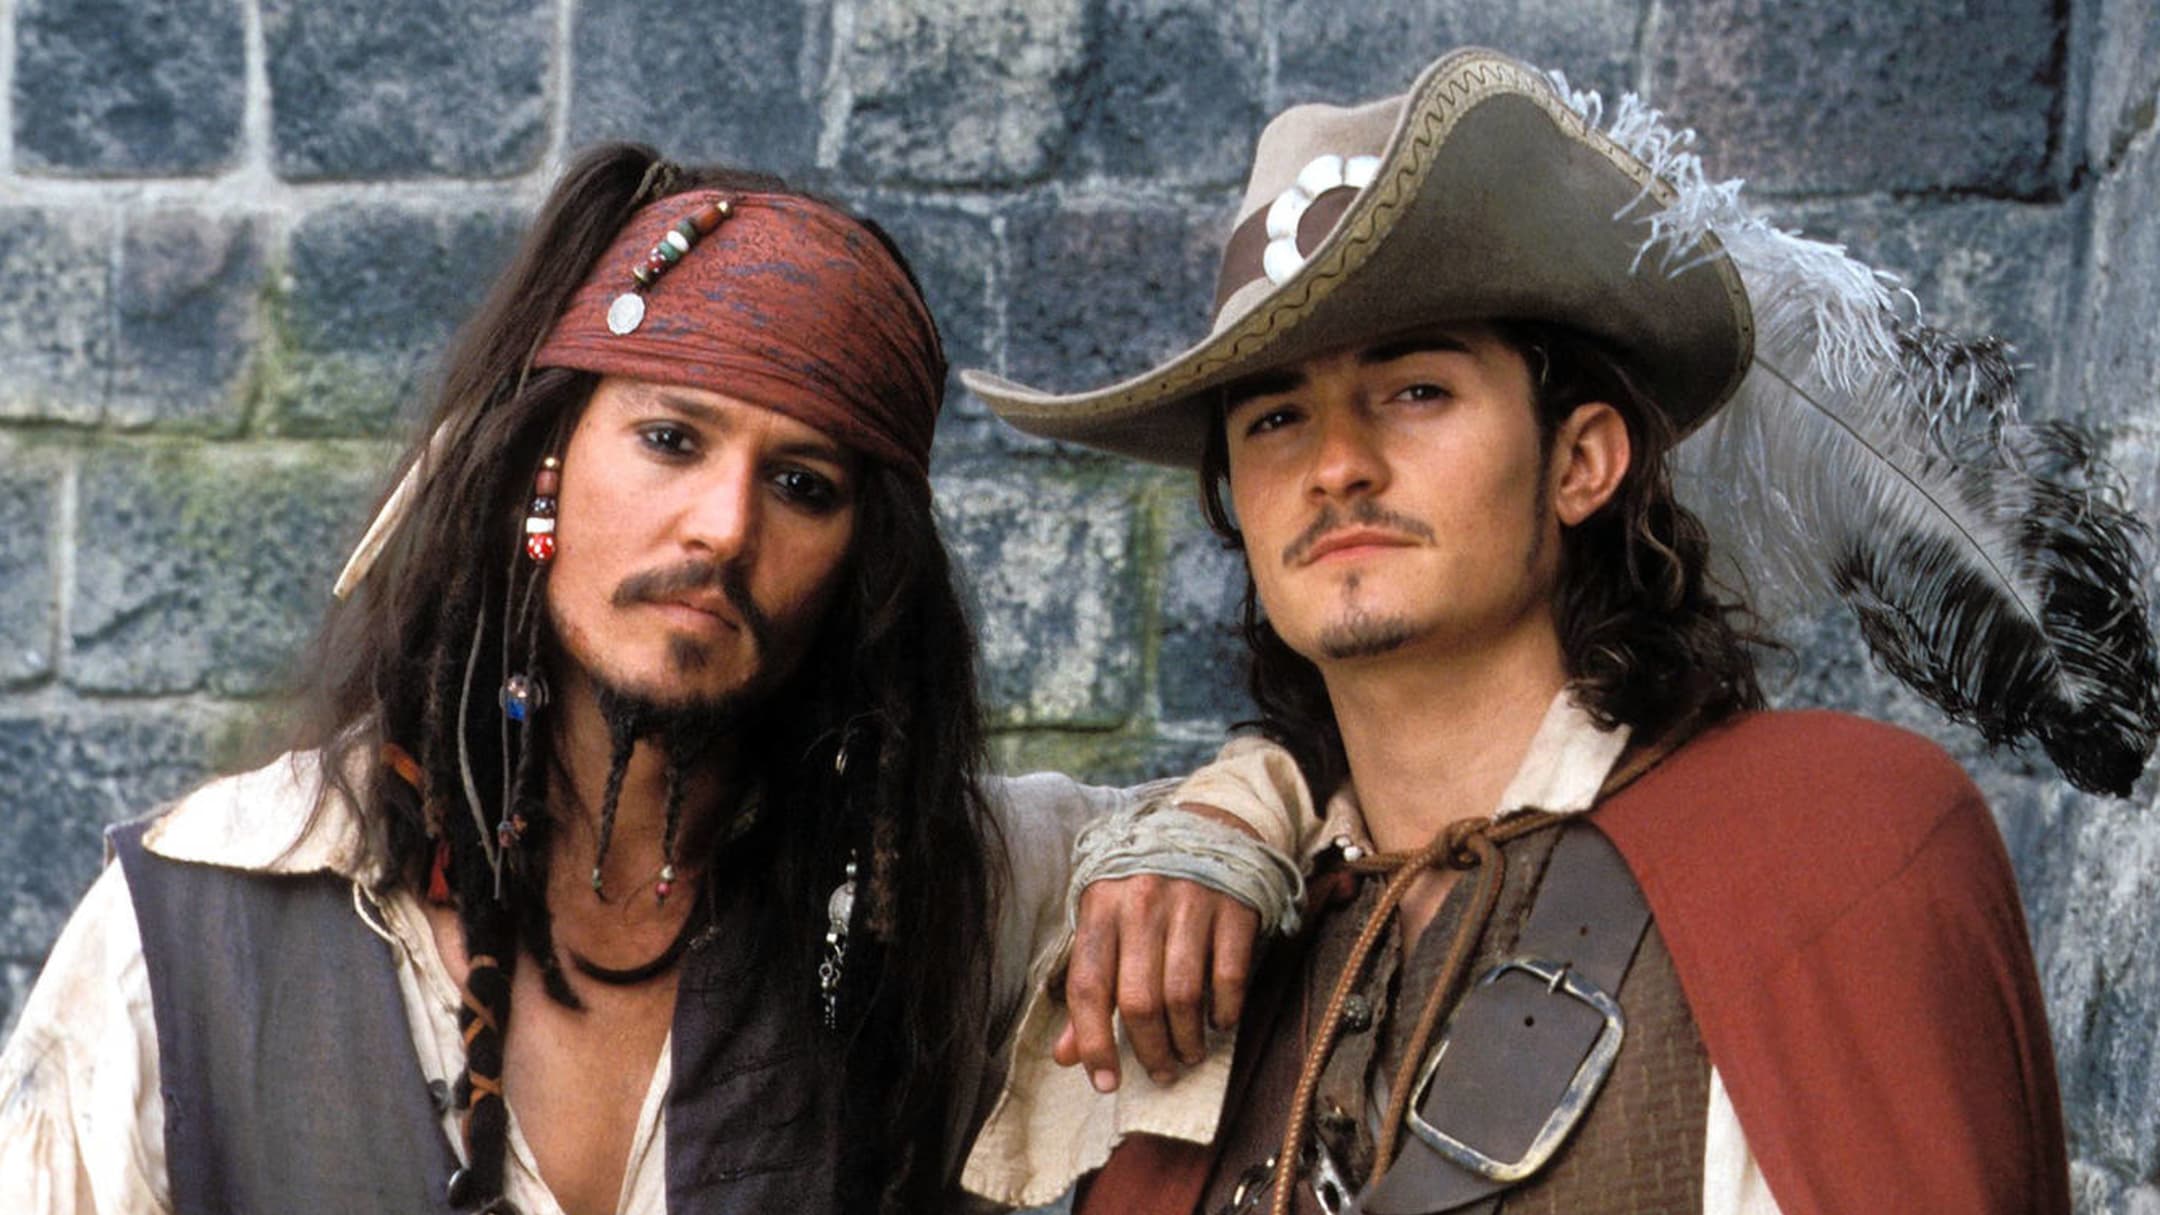 Pirates of the Caribbean' director recalls movie was 'doomed to